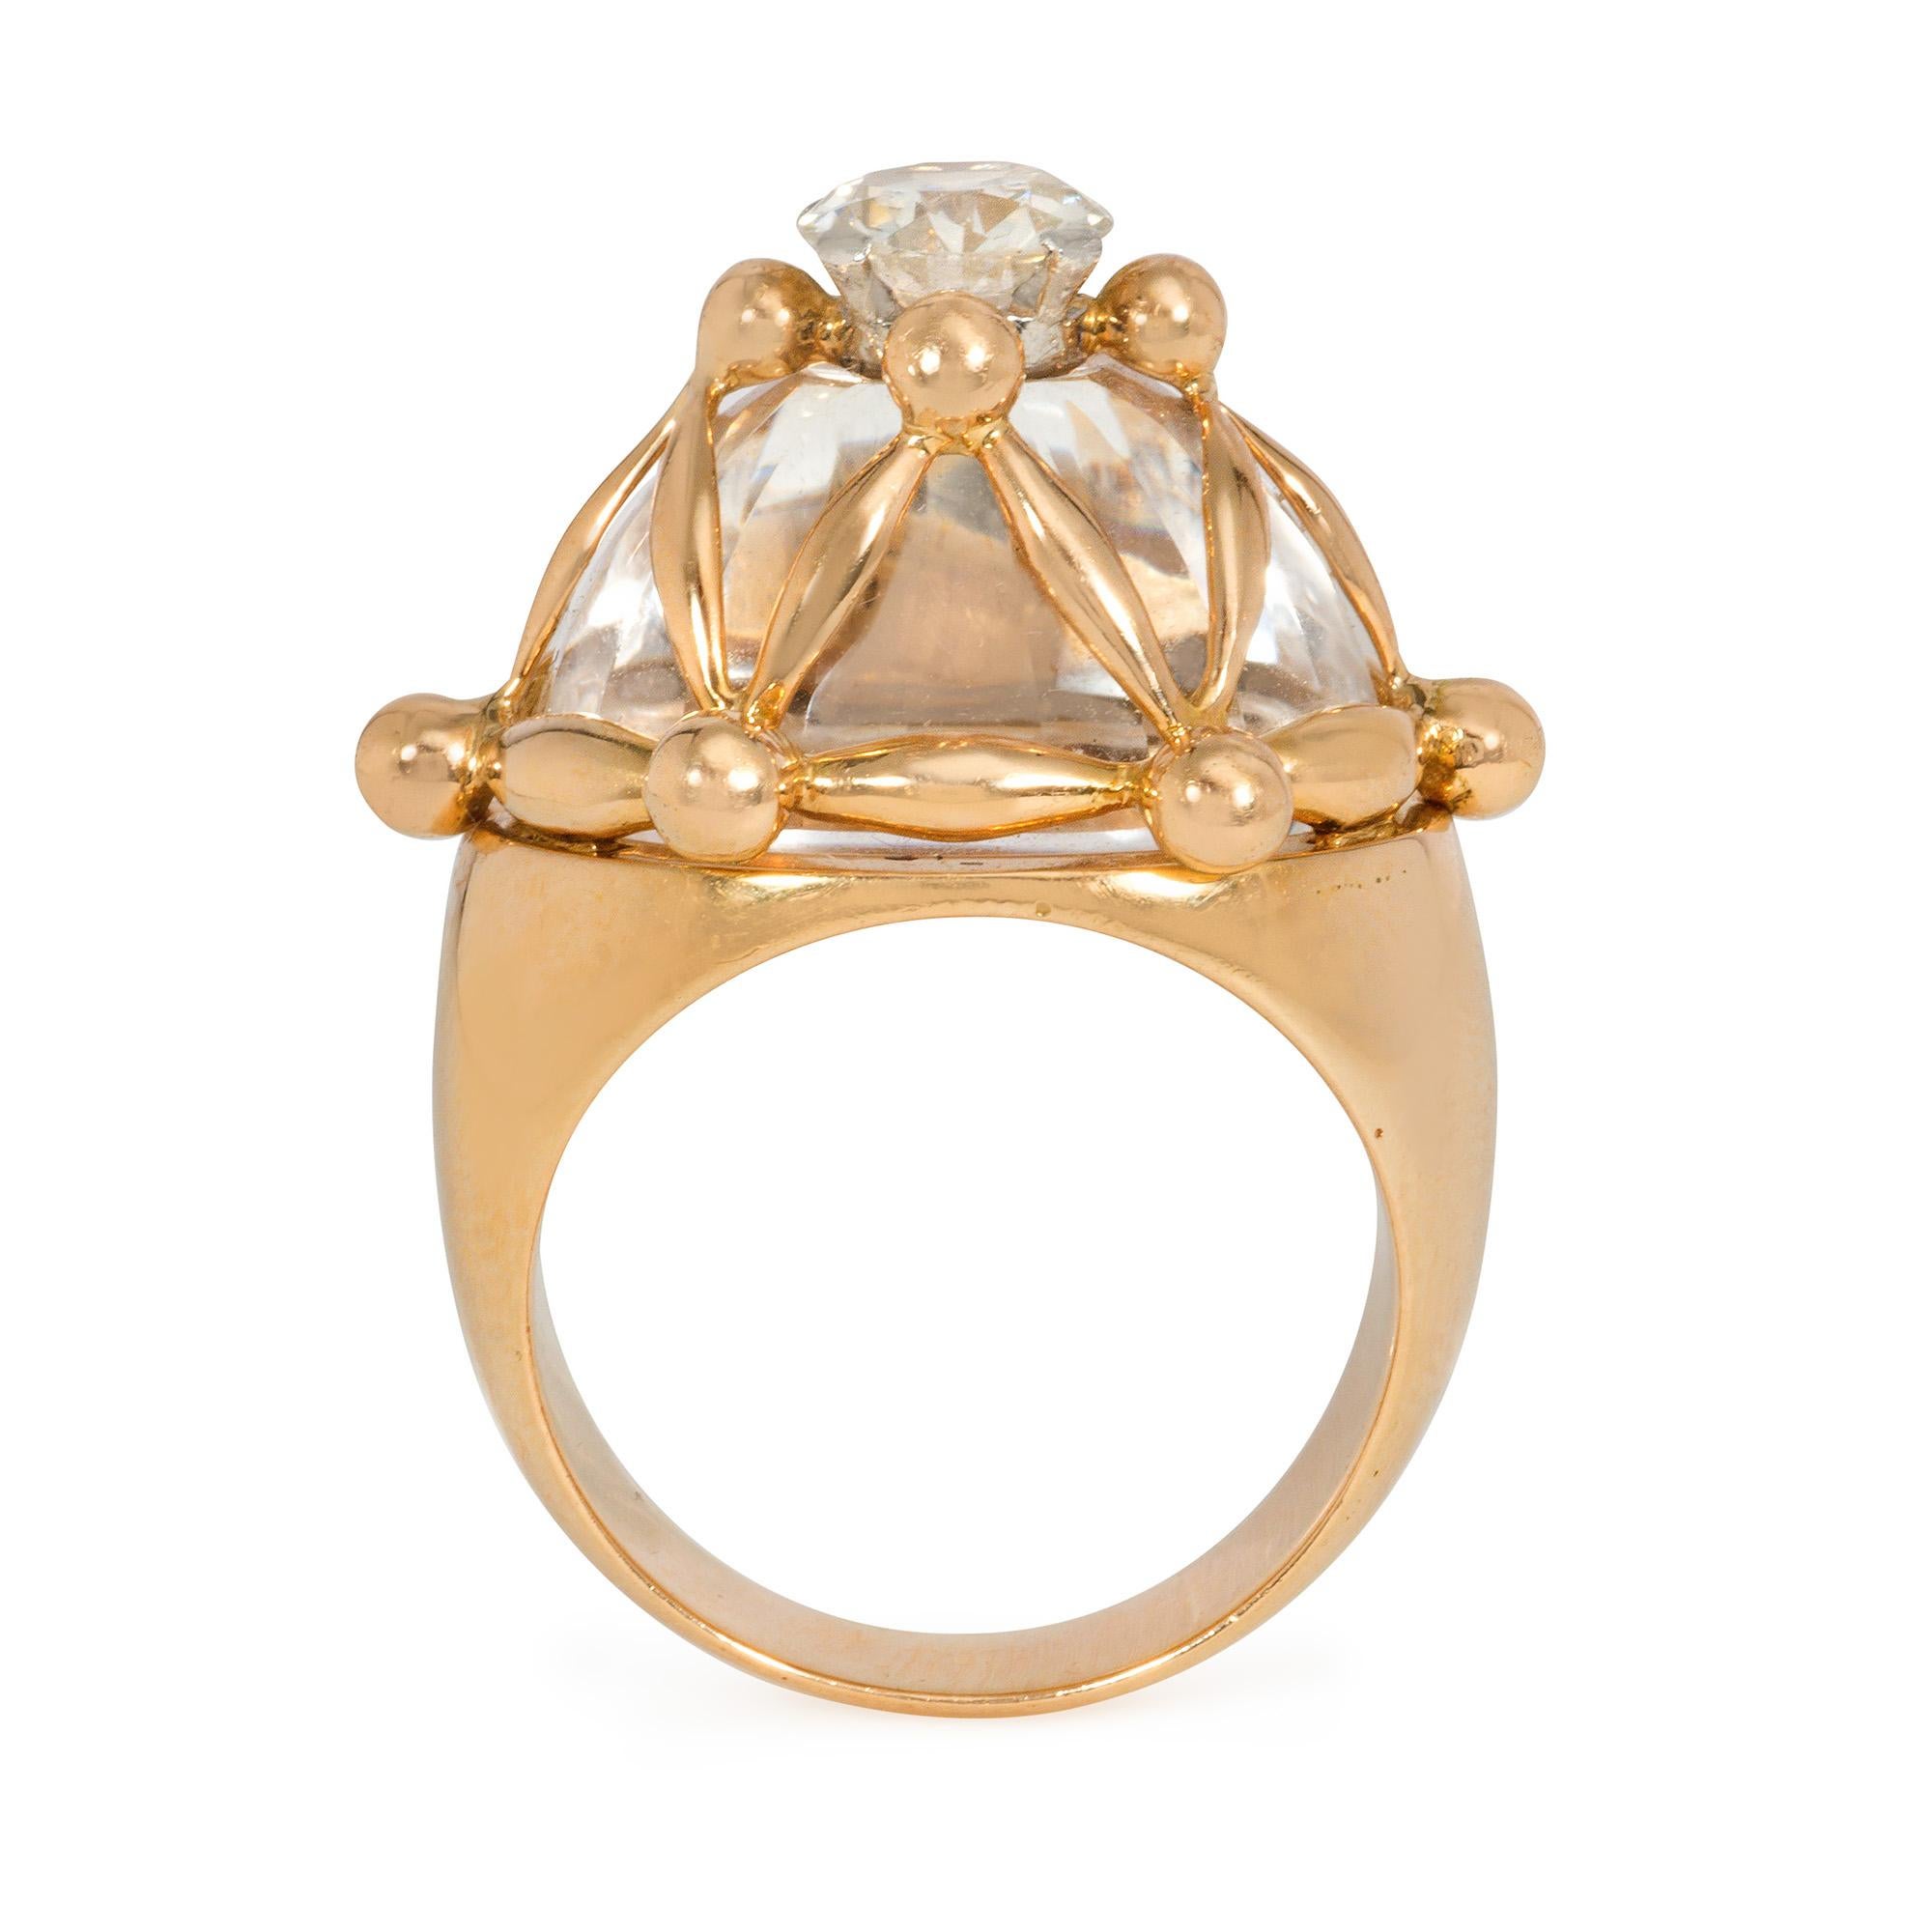 Modern French 1960s Bombé Gold, Rock Crystal, and Diamond Ring with Lattice Design For Sale